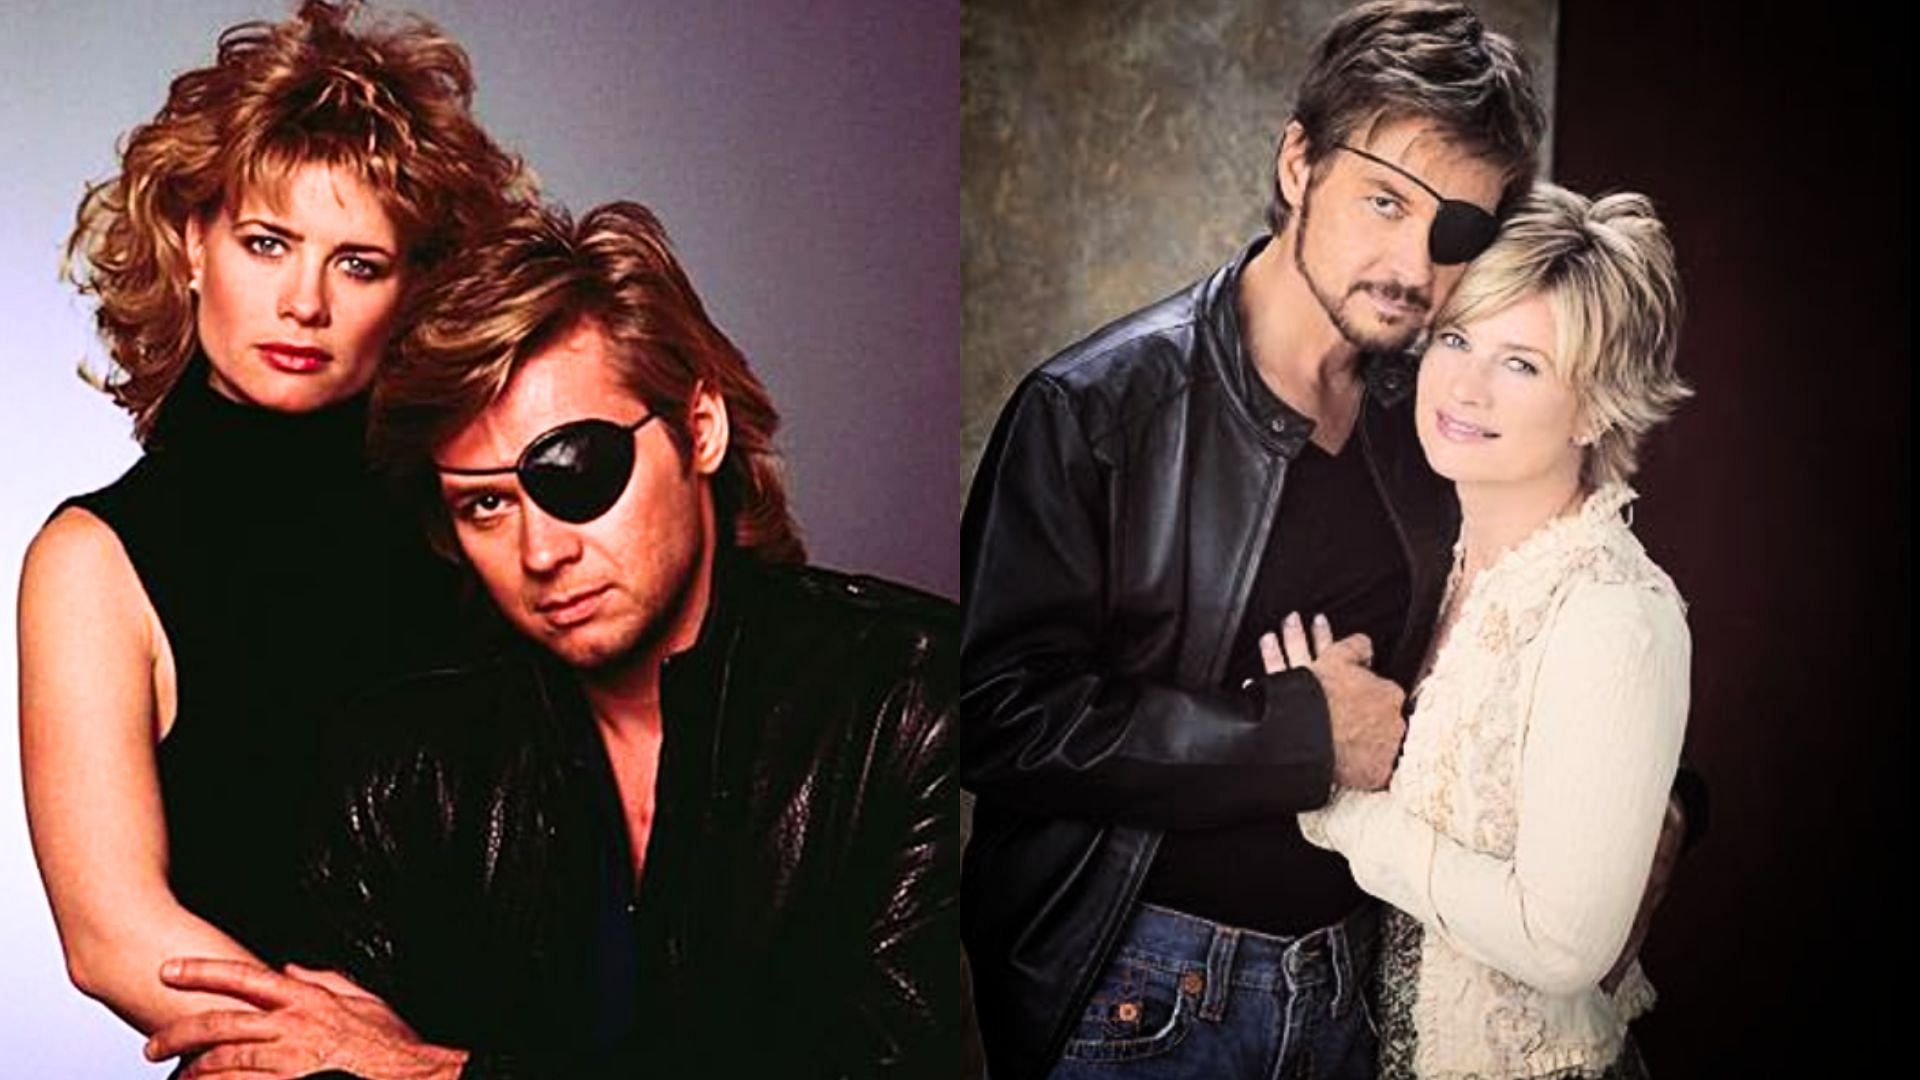 Steve and Kayla stayed &quot;Stayla&quot; over the years (Image via IMDb)